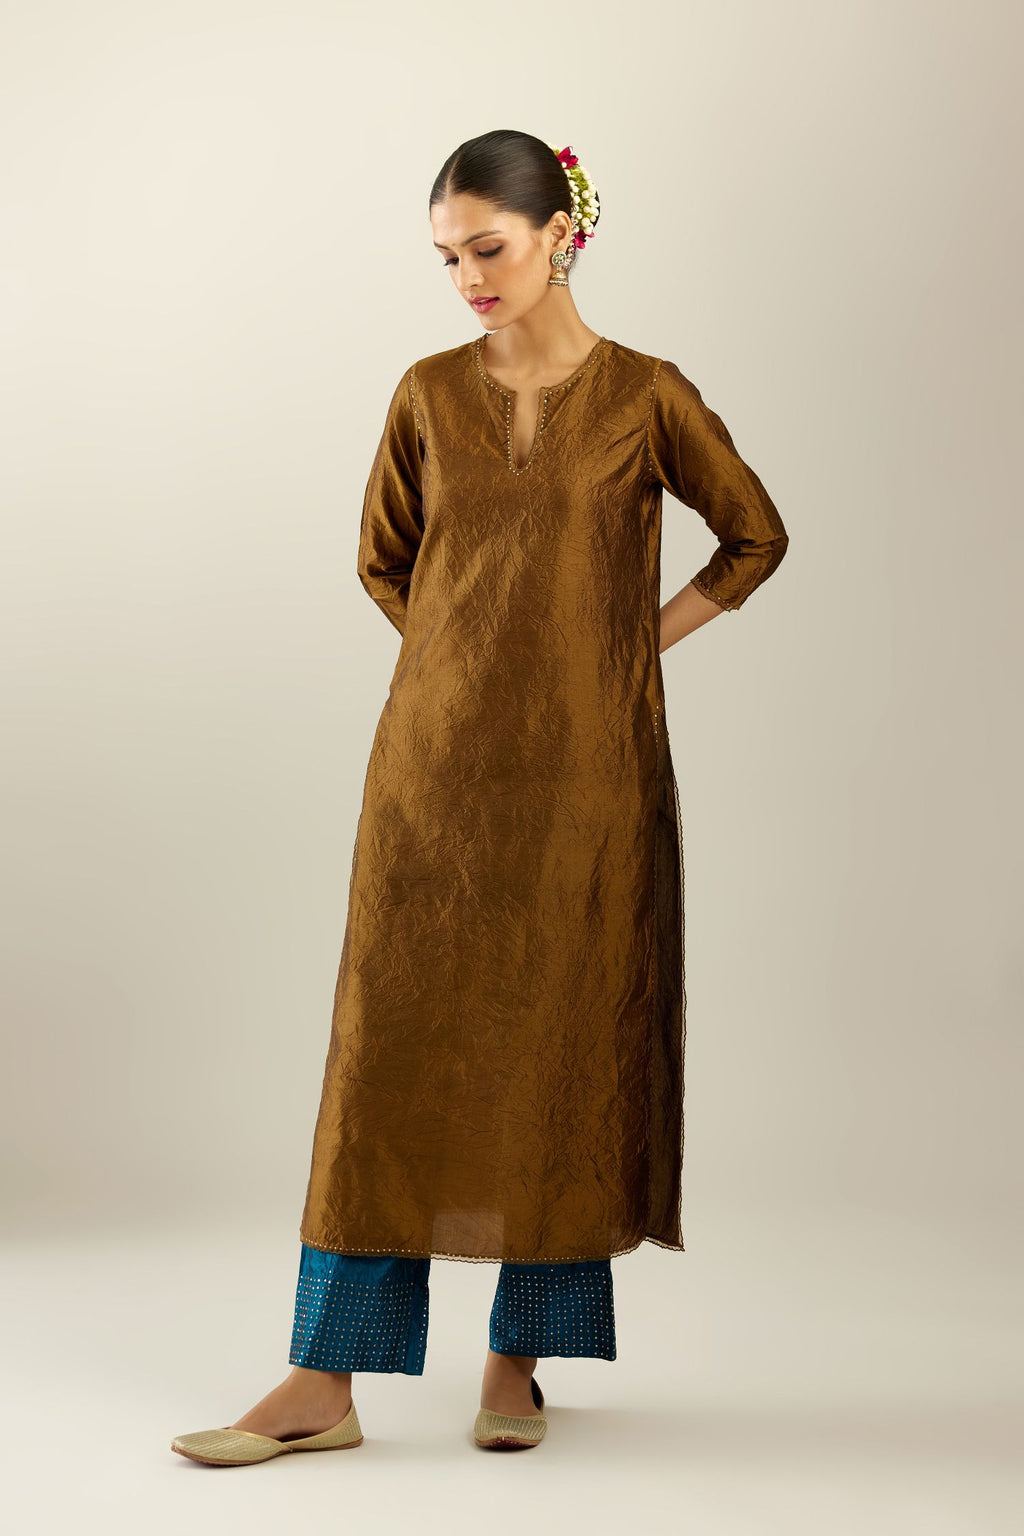 Golden olive silk straight kurta set, highlighted with organza and sequins at edges.